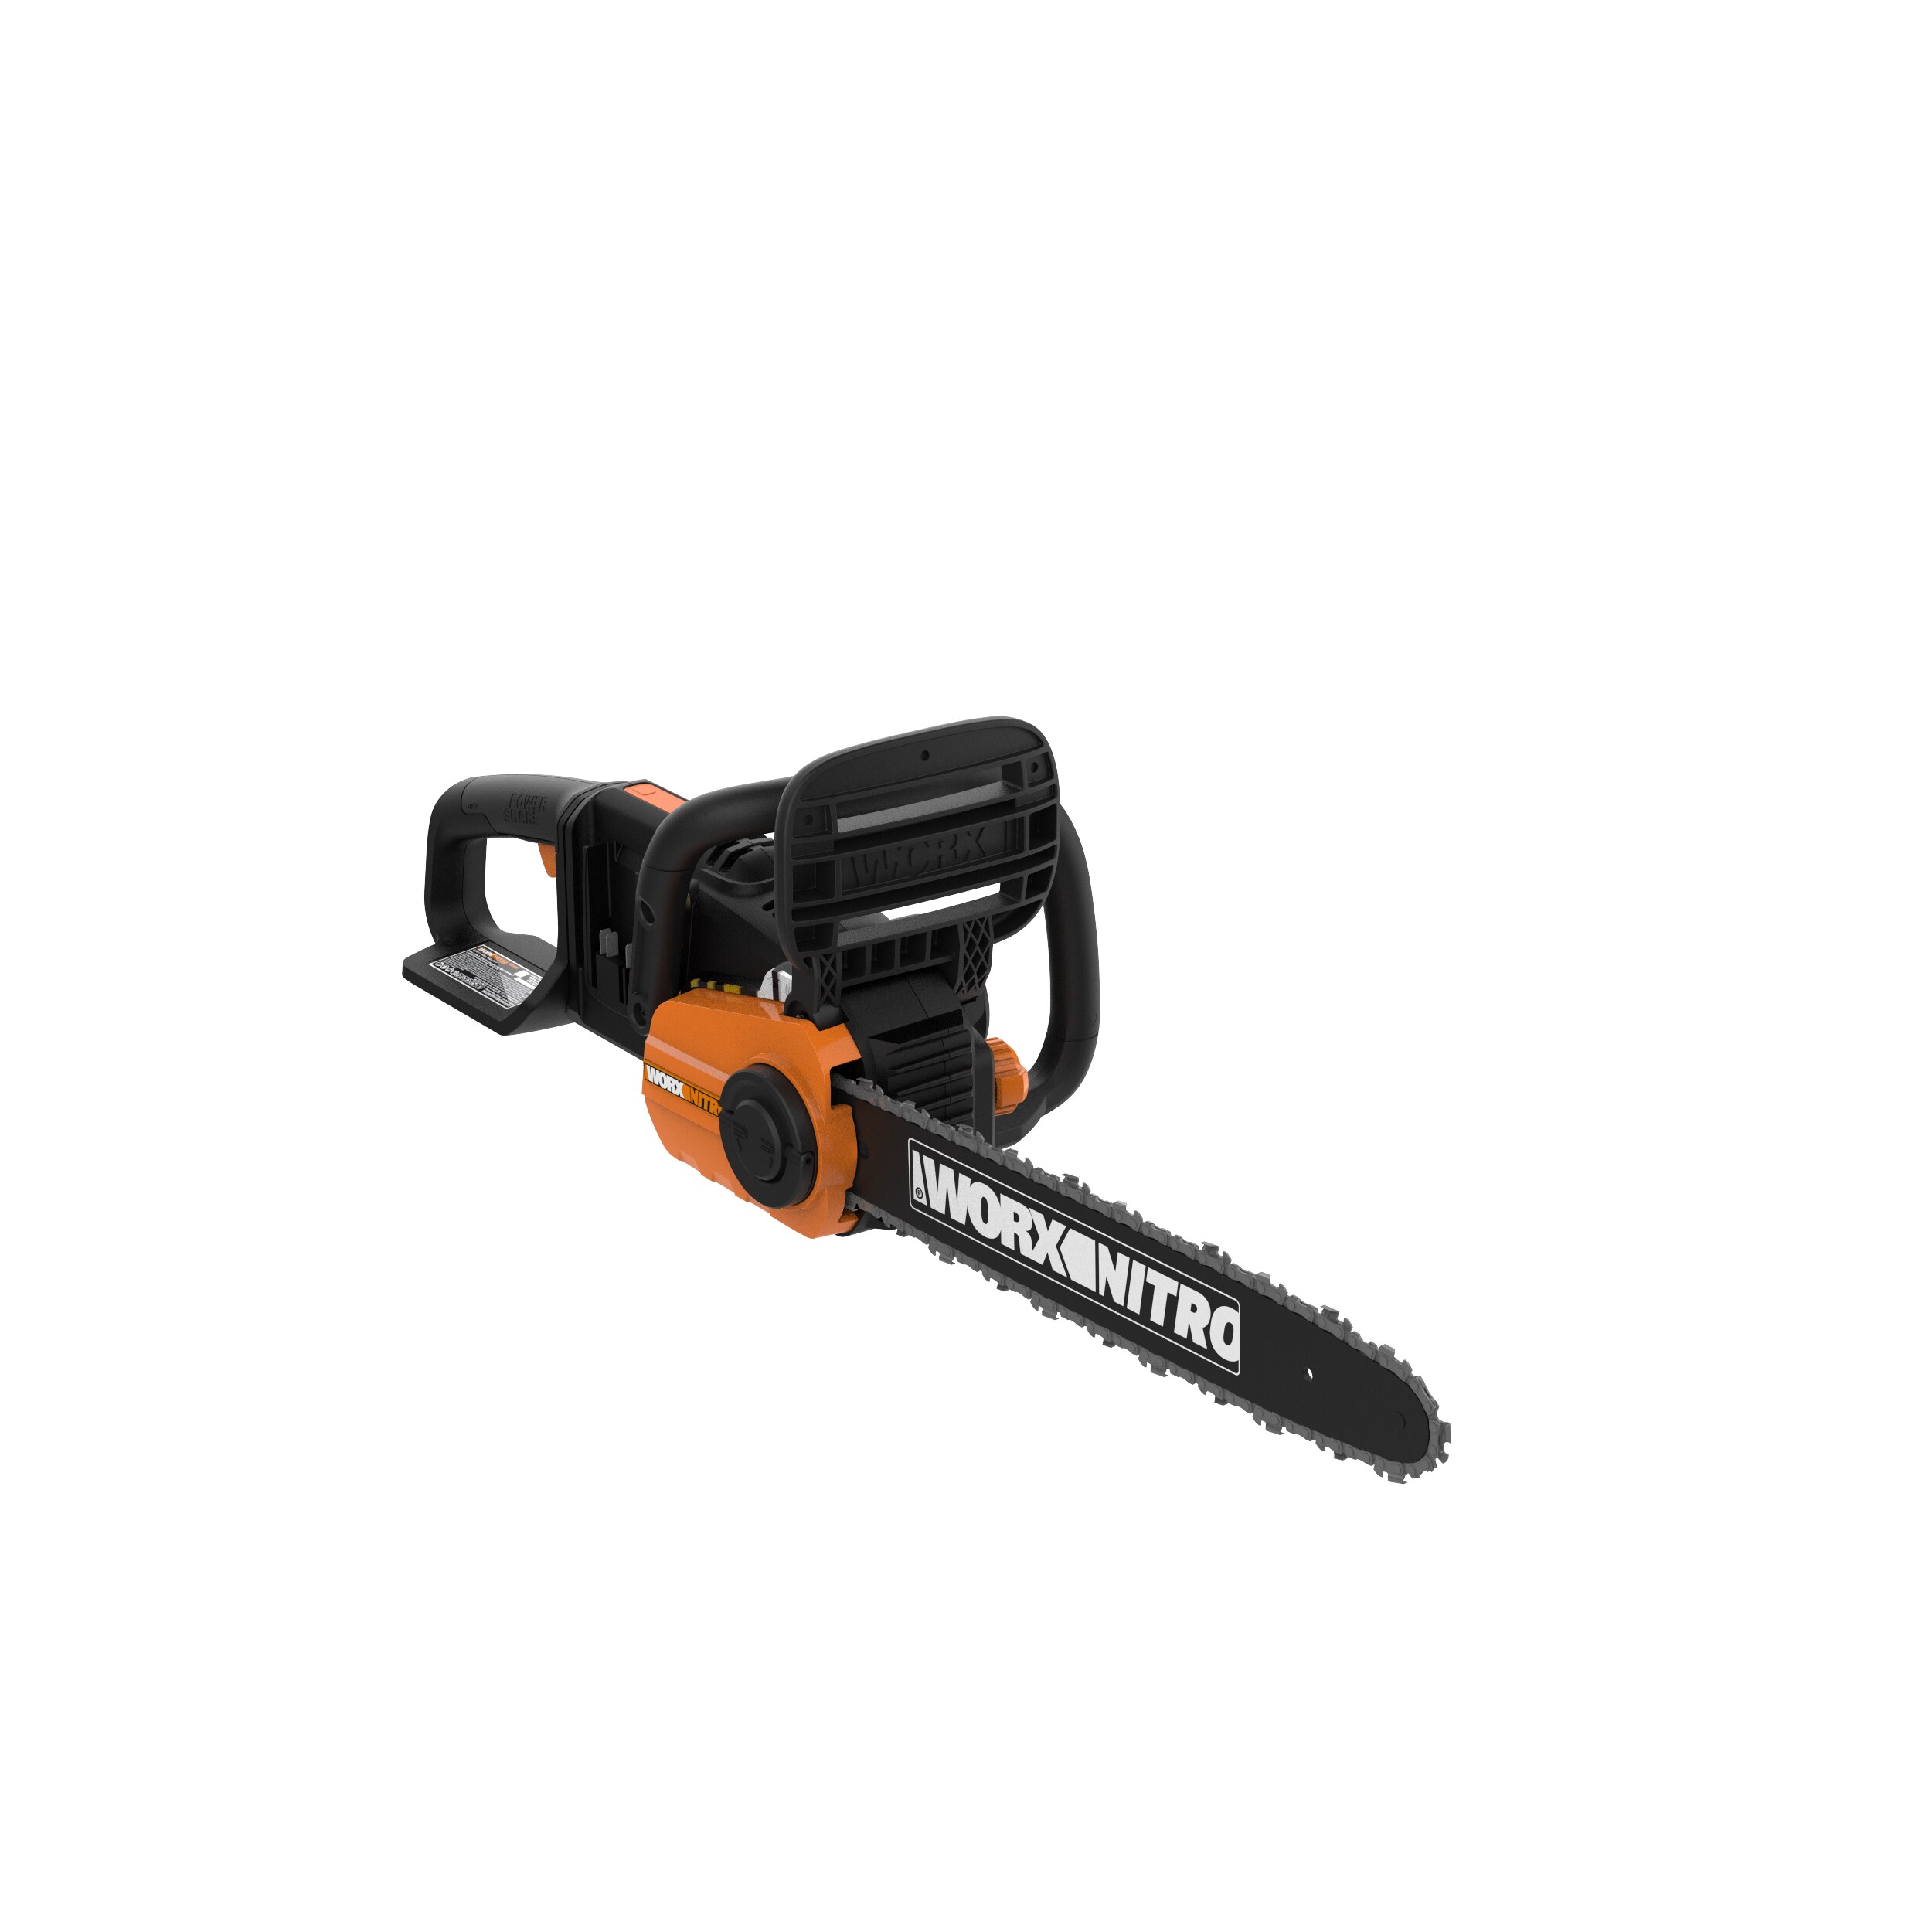 and Chain Brake Battery and Charger Included Chain Lubrication Worx Nitro WG385 Power Share 40V 16-in Cordless Chainsaw with Auto Chain Tensioning 